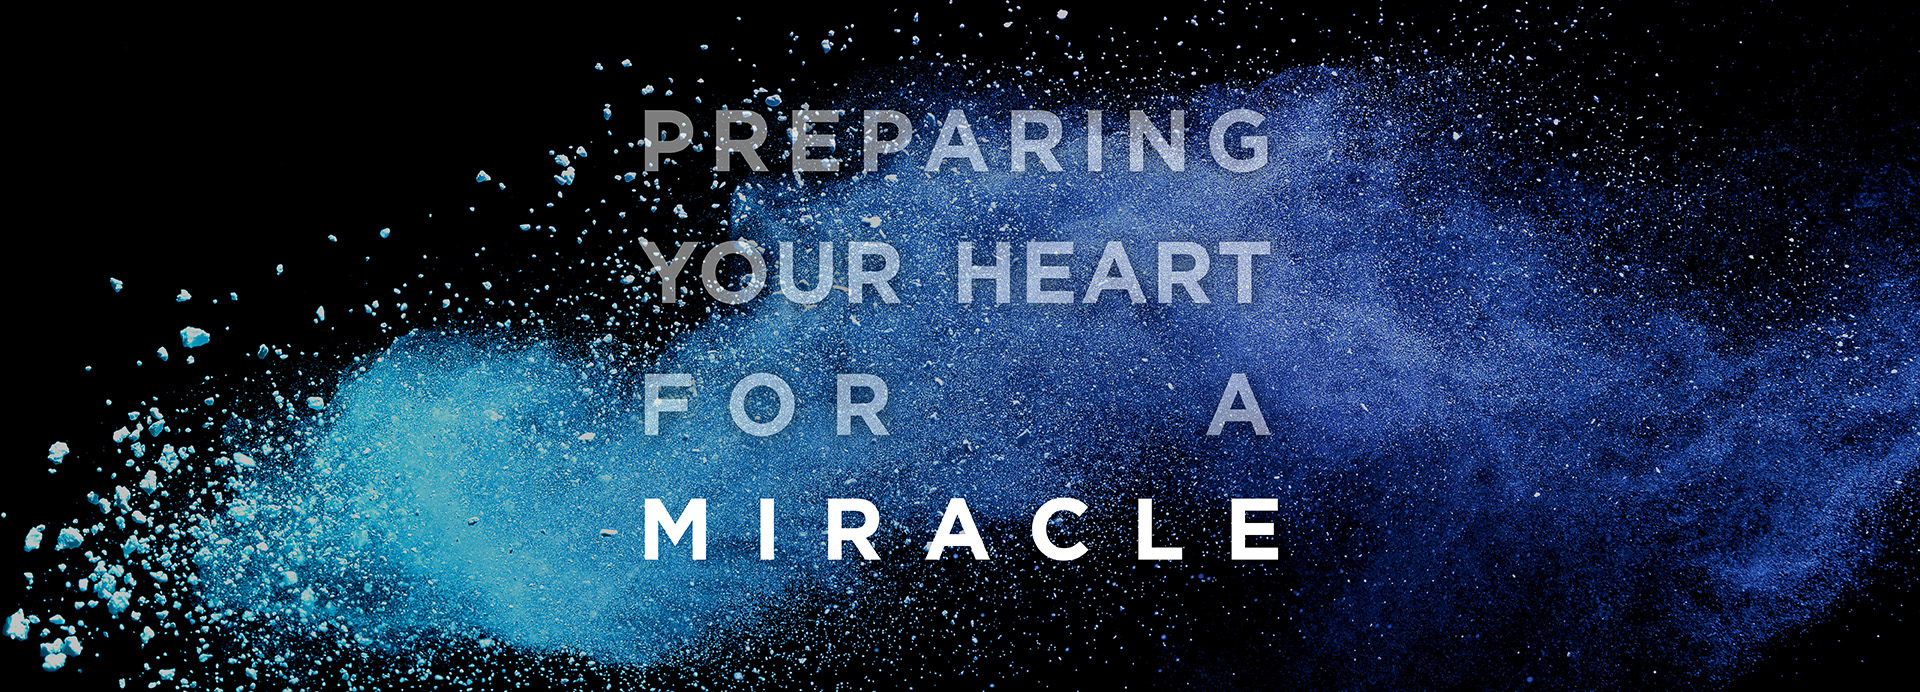 Preparing Your Heart For a Miracle